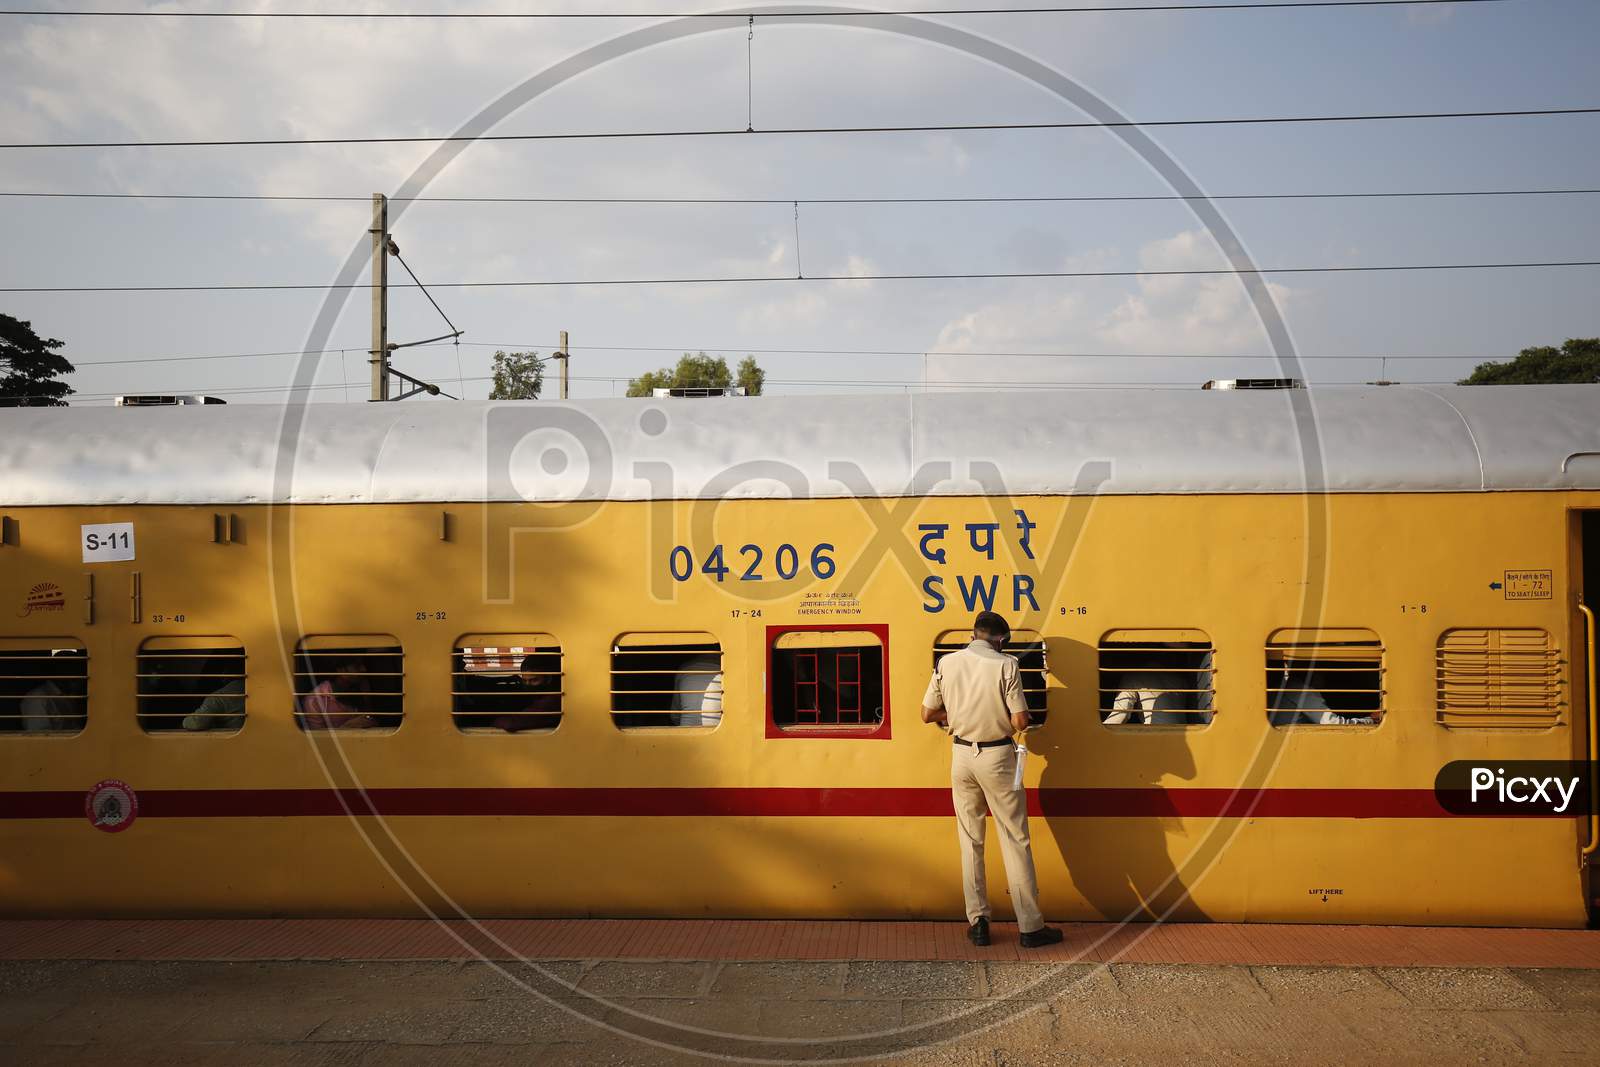 A Railway Protection Force (RPF) personnel checks travel documents of migrant workers travelling to Danapur, Bihar in a special train arranged by the government to repatriate migrant workers at the Chikkabanavara Junction Railway Station on the outskirts of Bangalore, India.